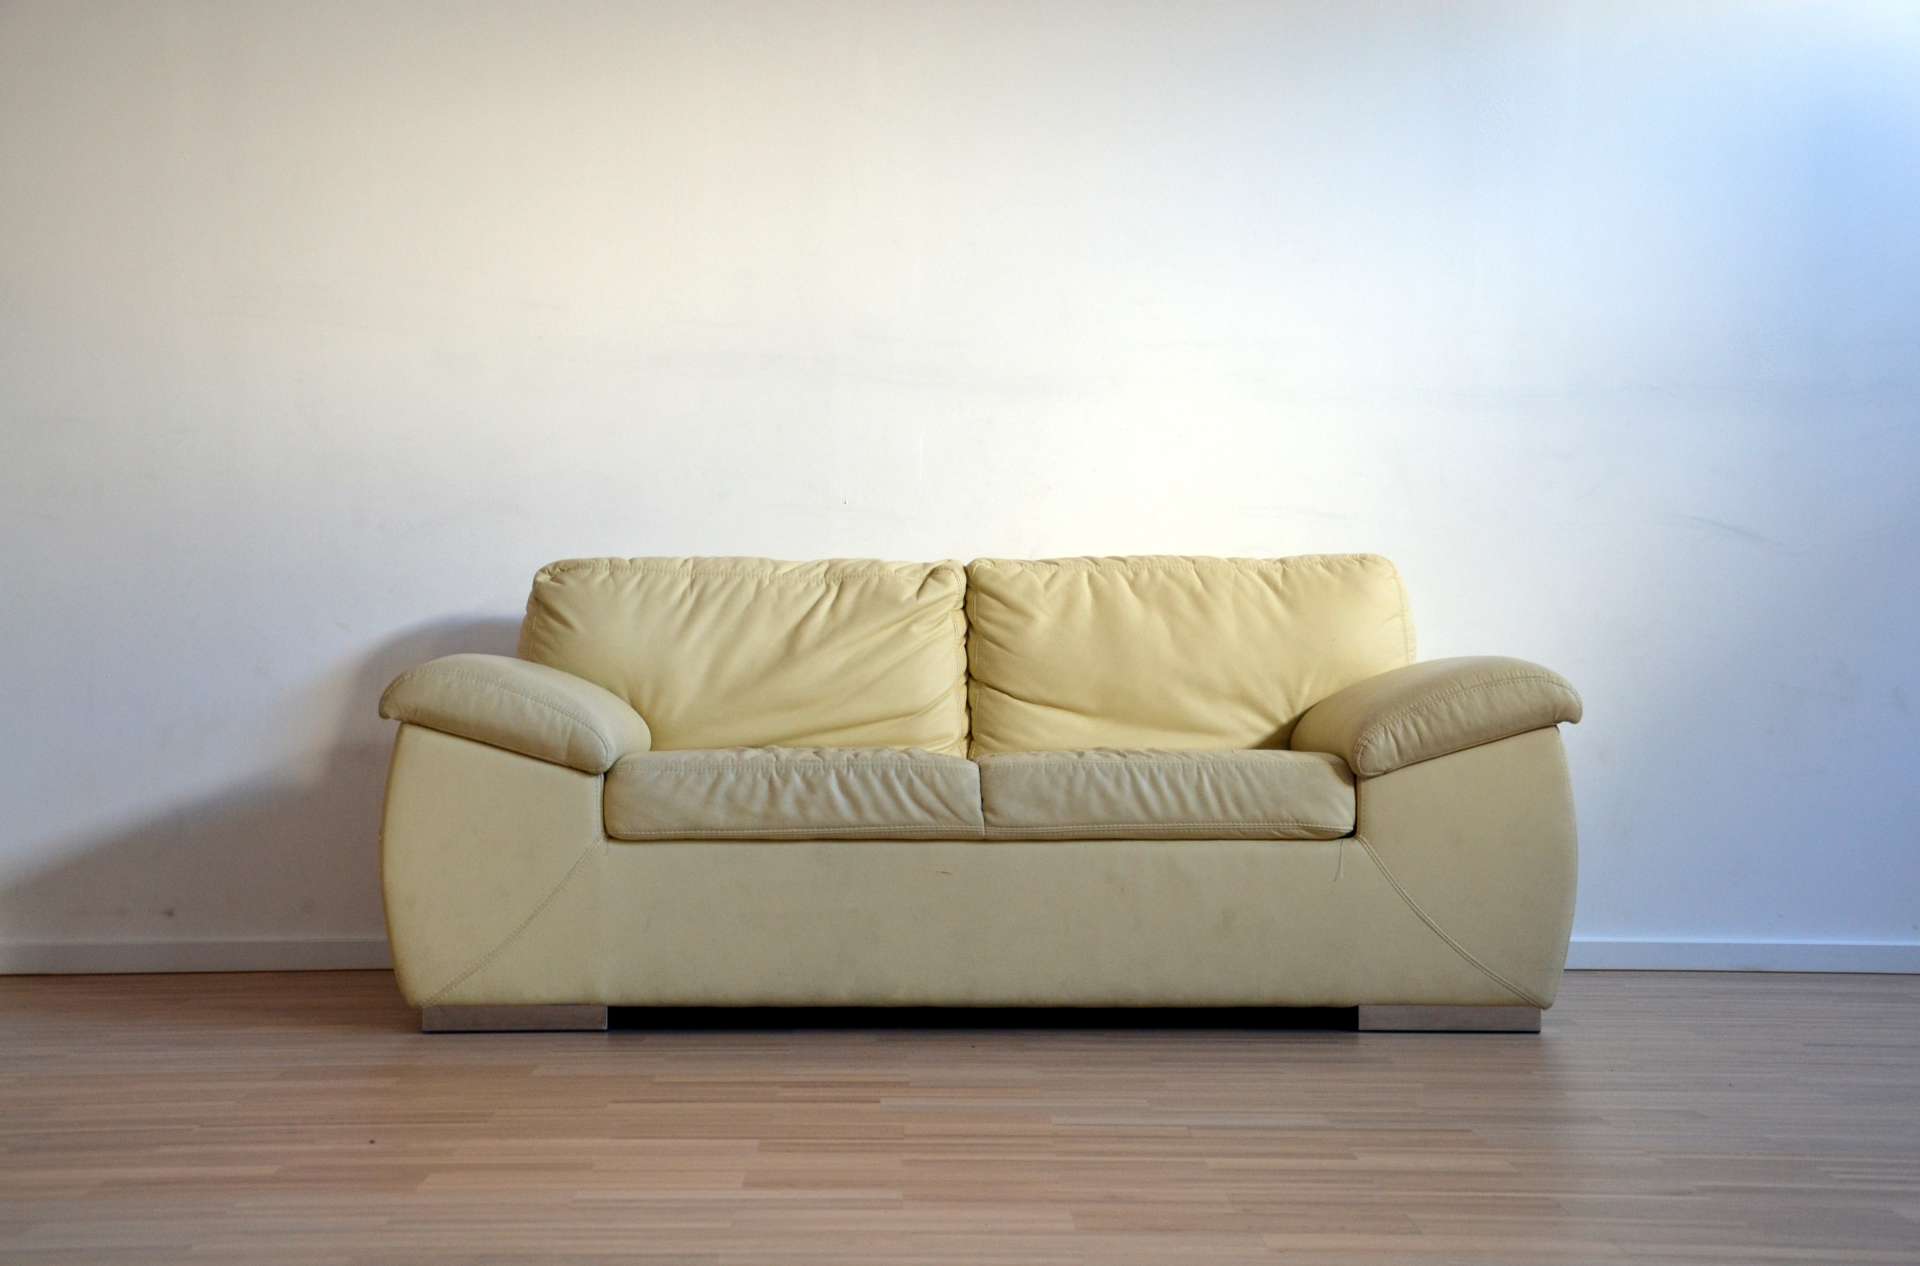 yellow leather used sofa in an empty room